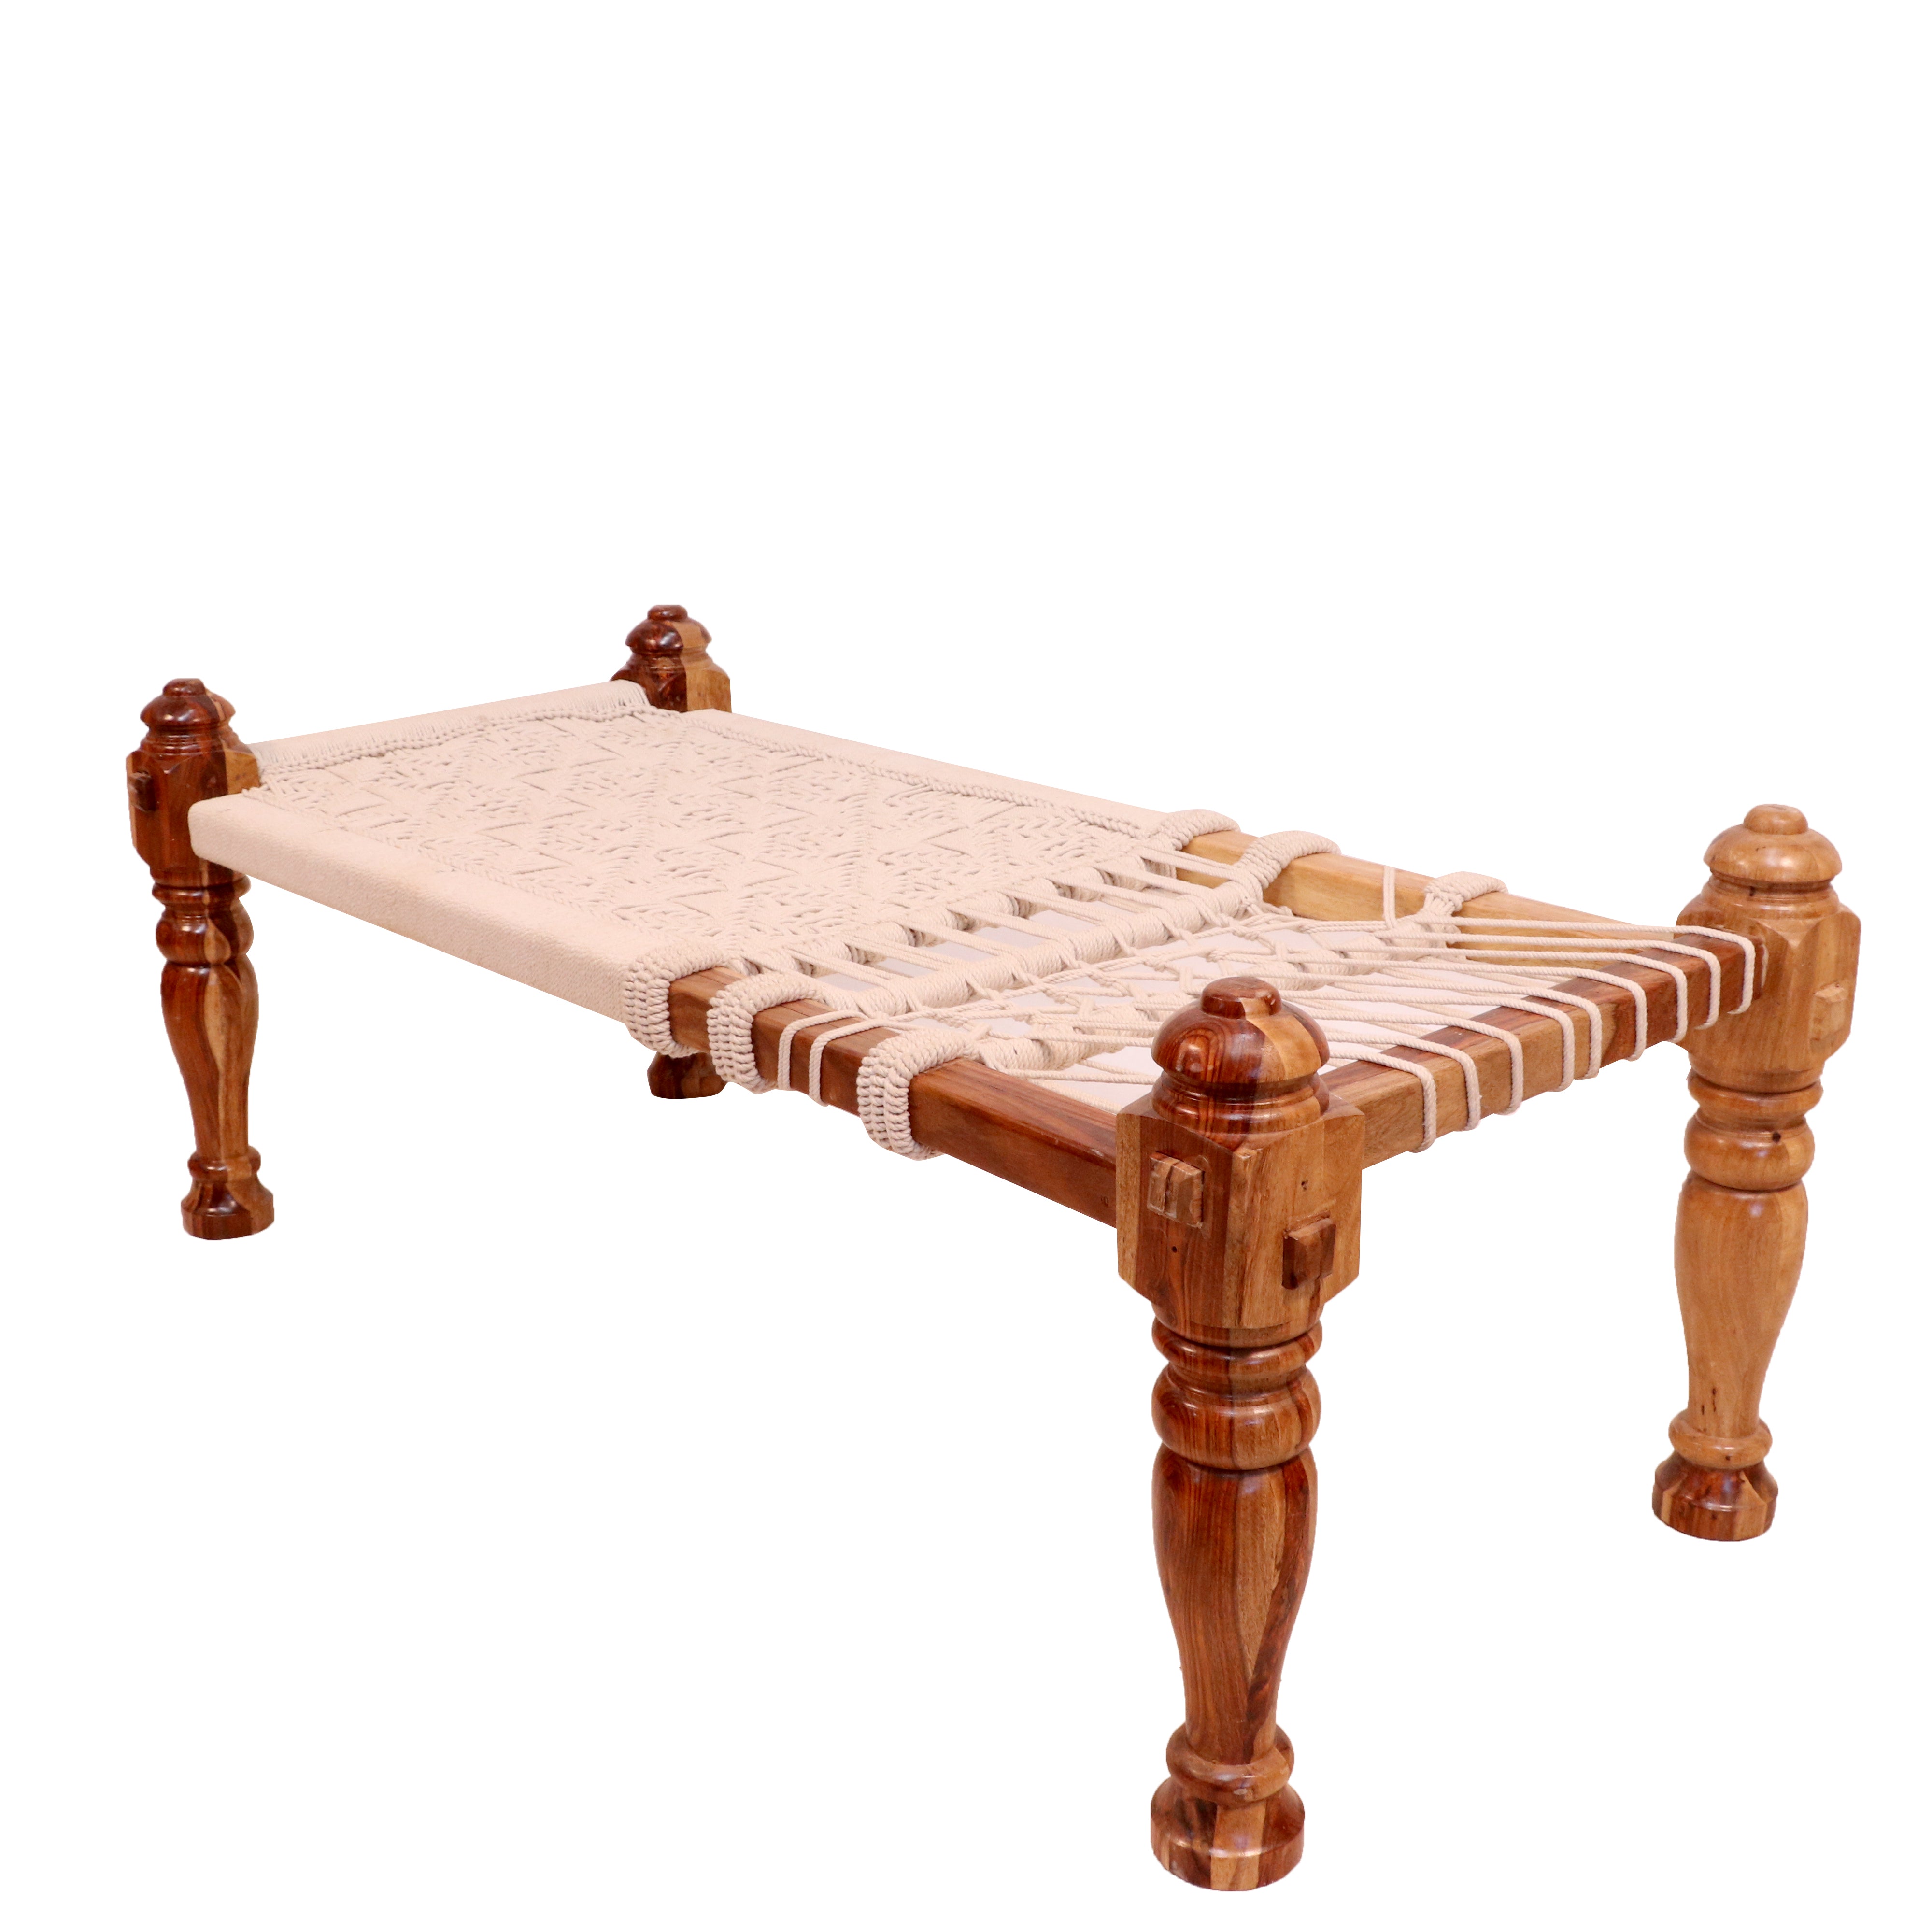 Classical Indian day bed Daybed